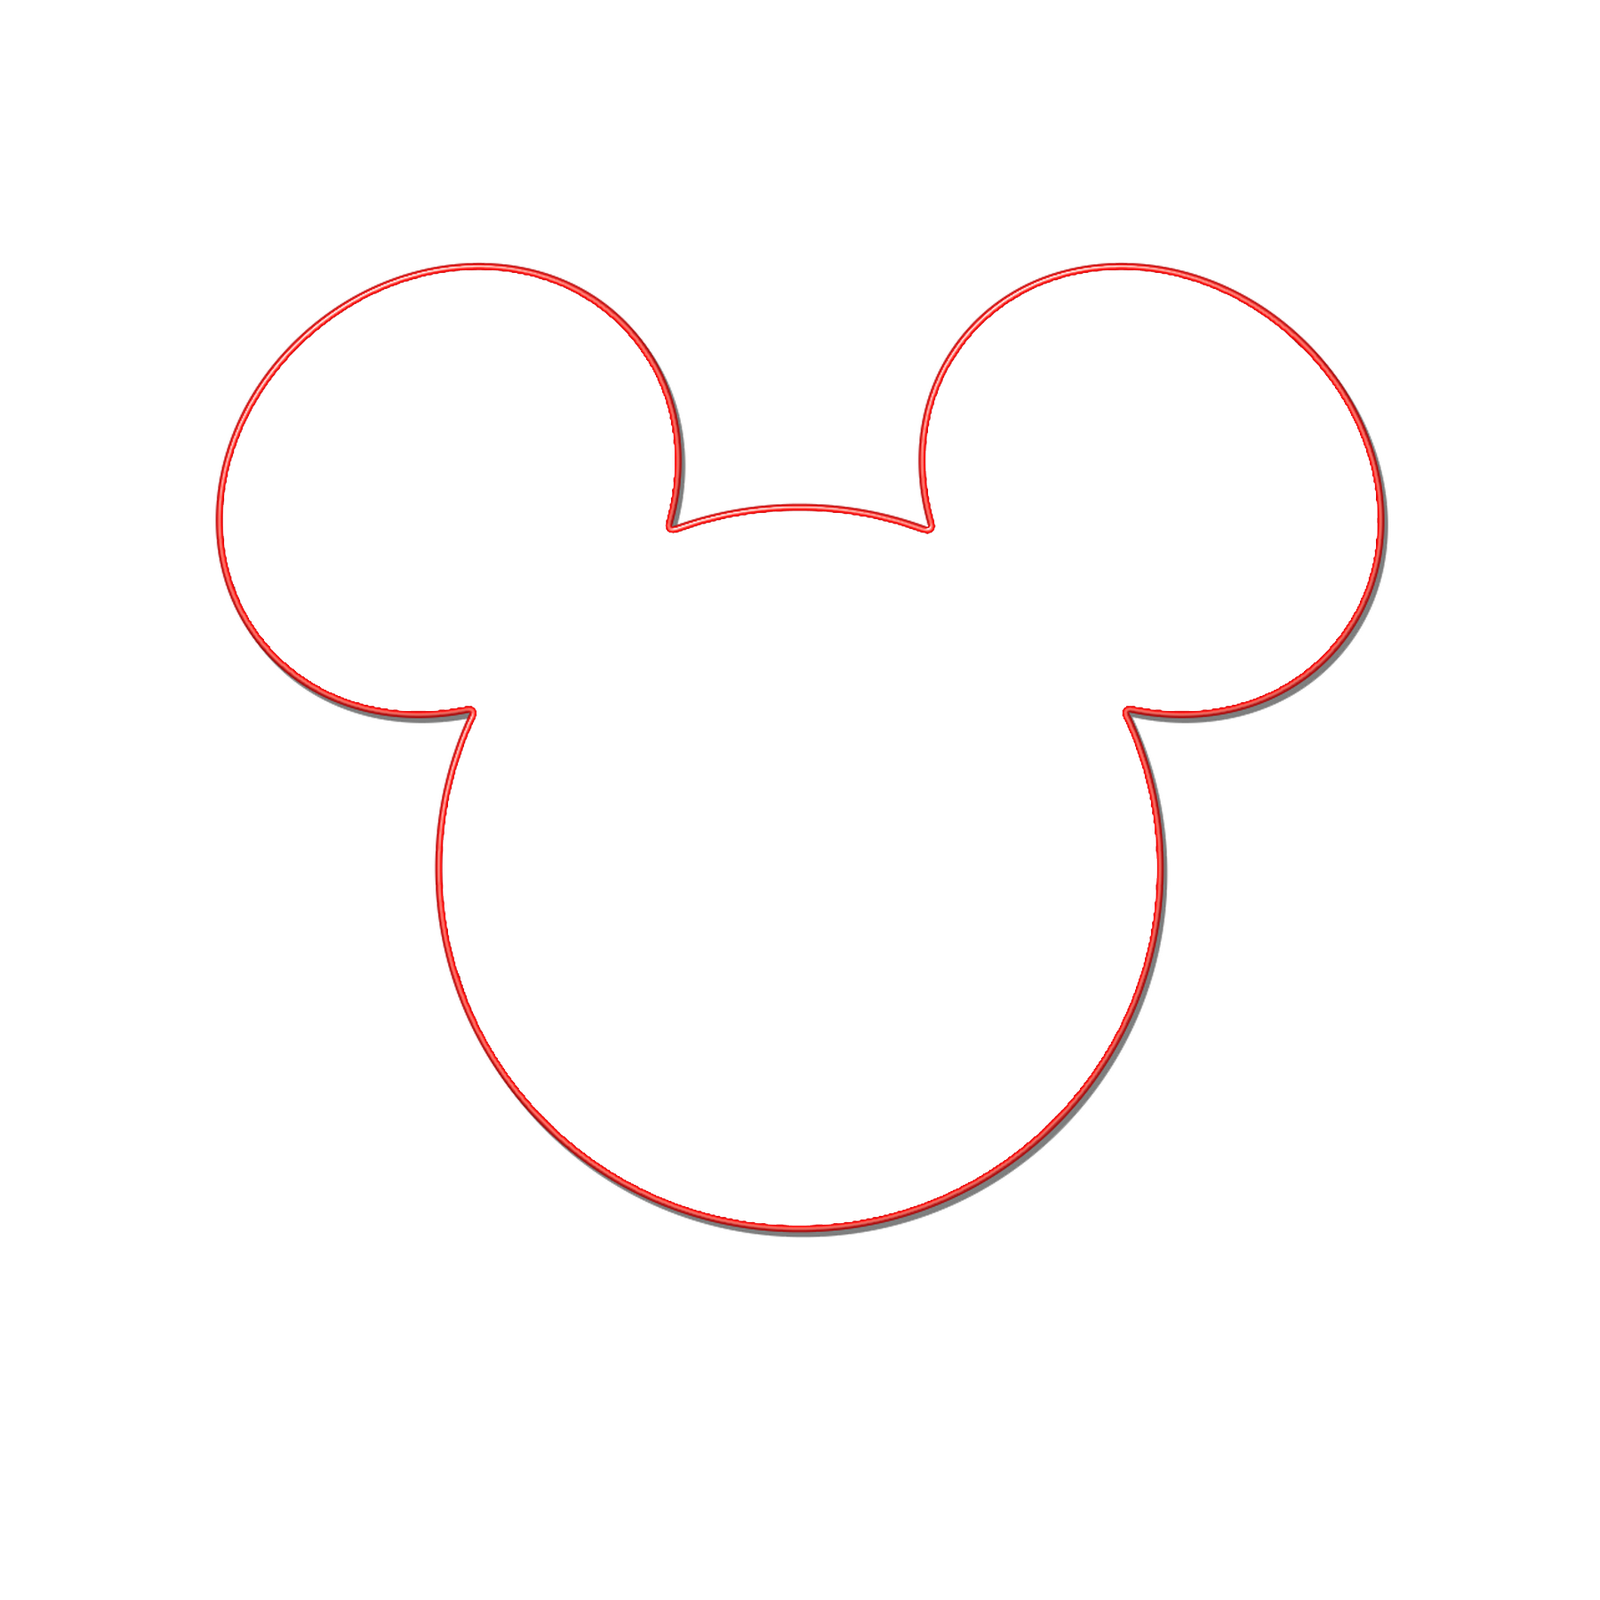 Mickey Mouse Vector Download On Png Image Clipart.